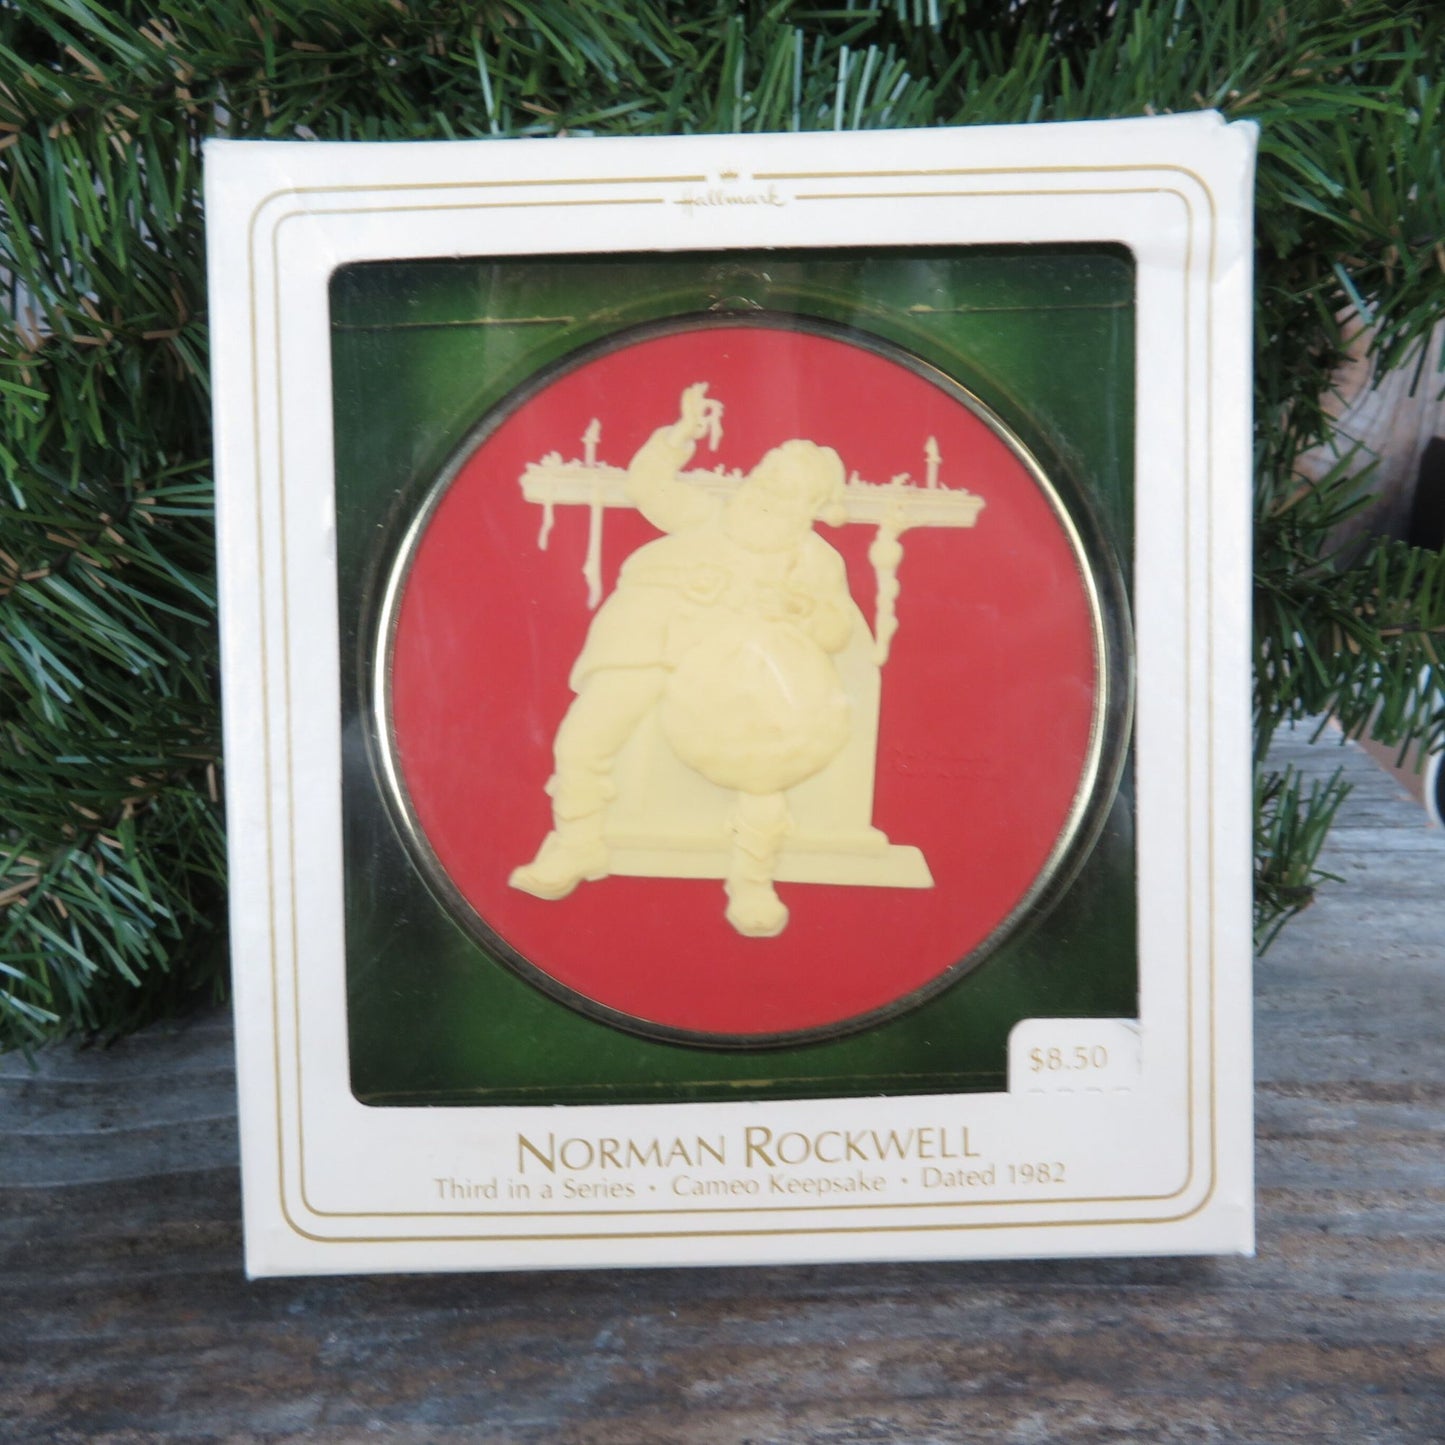 Vintage Santa Claus Christmas Cameo Ornament Norman Rockwell Filling the Stocking Collection Hallmark 1982